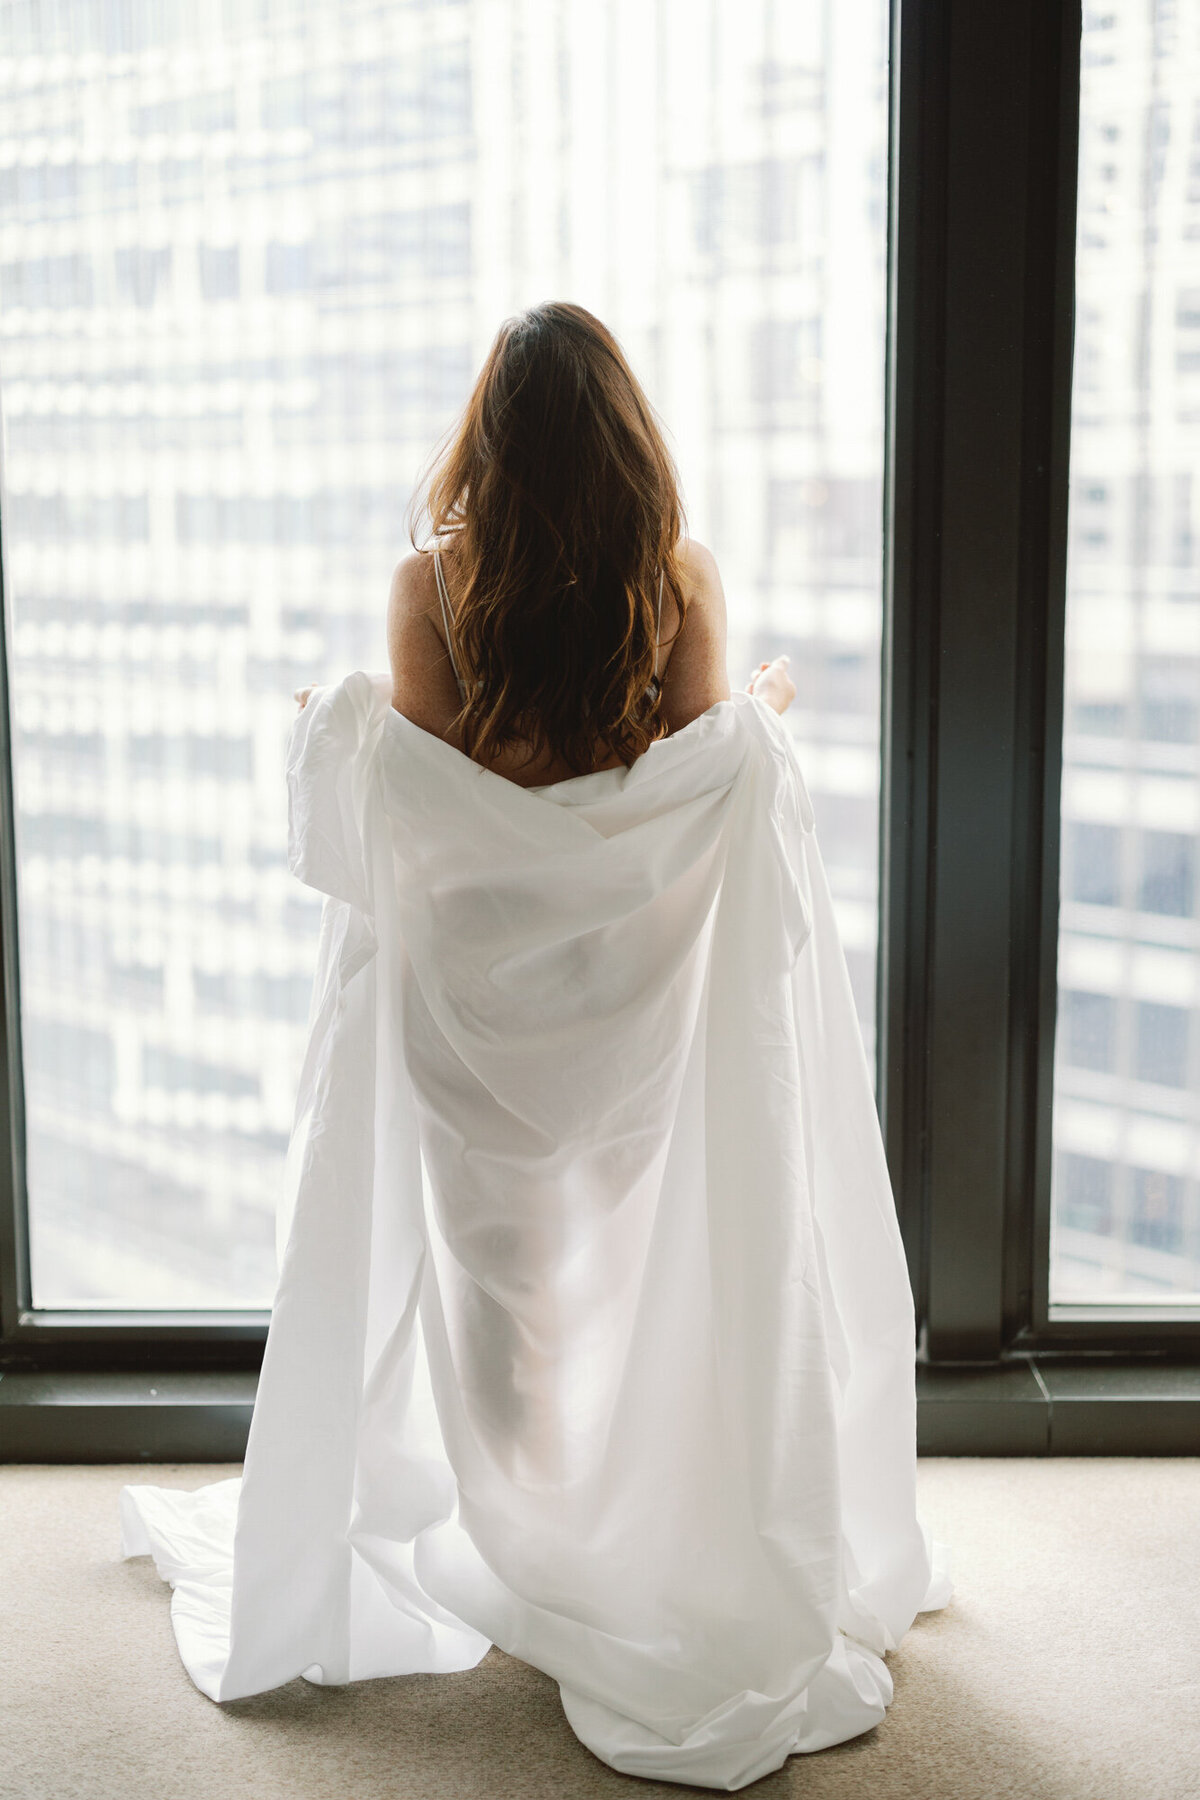 A woman wears bed sheets as she poses for a boudoir photo in downtown Chicago